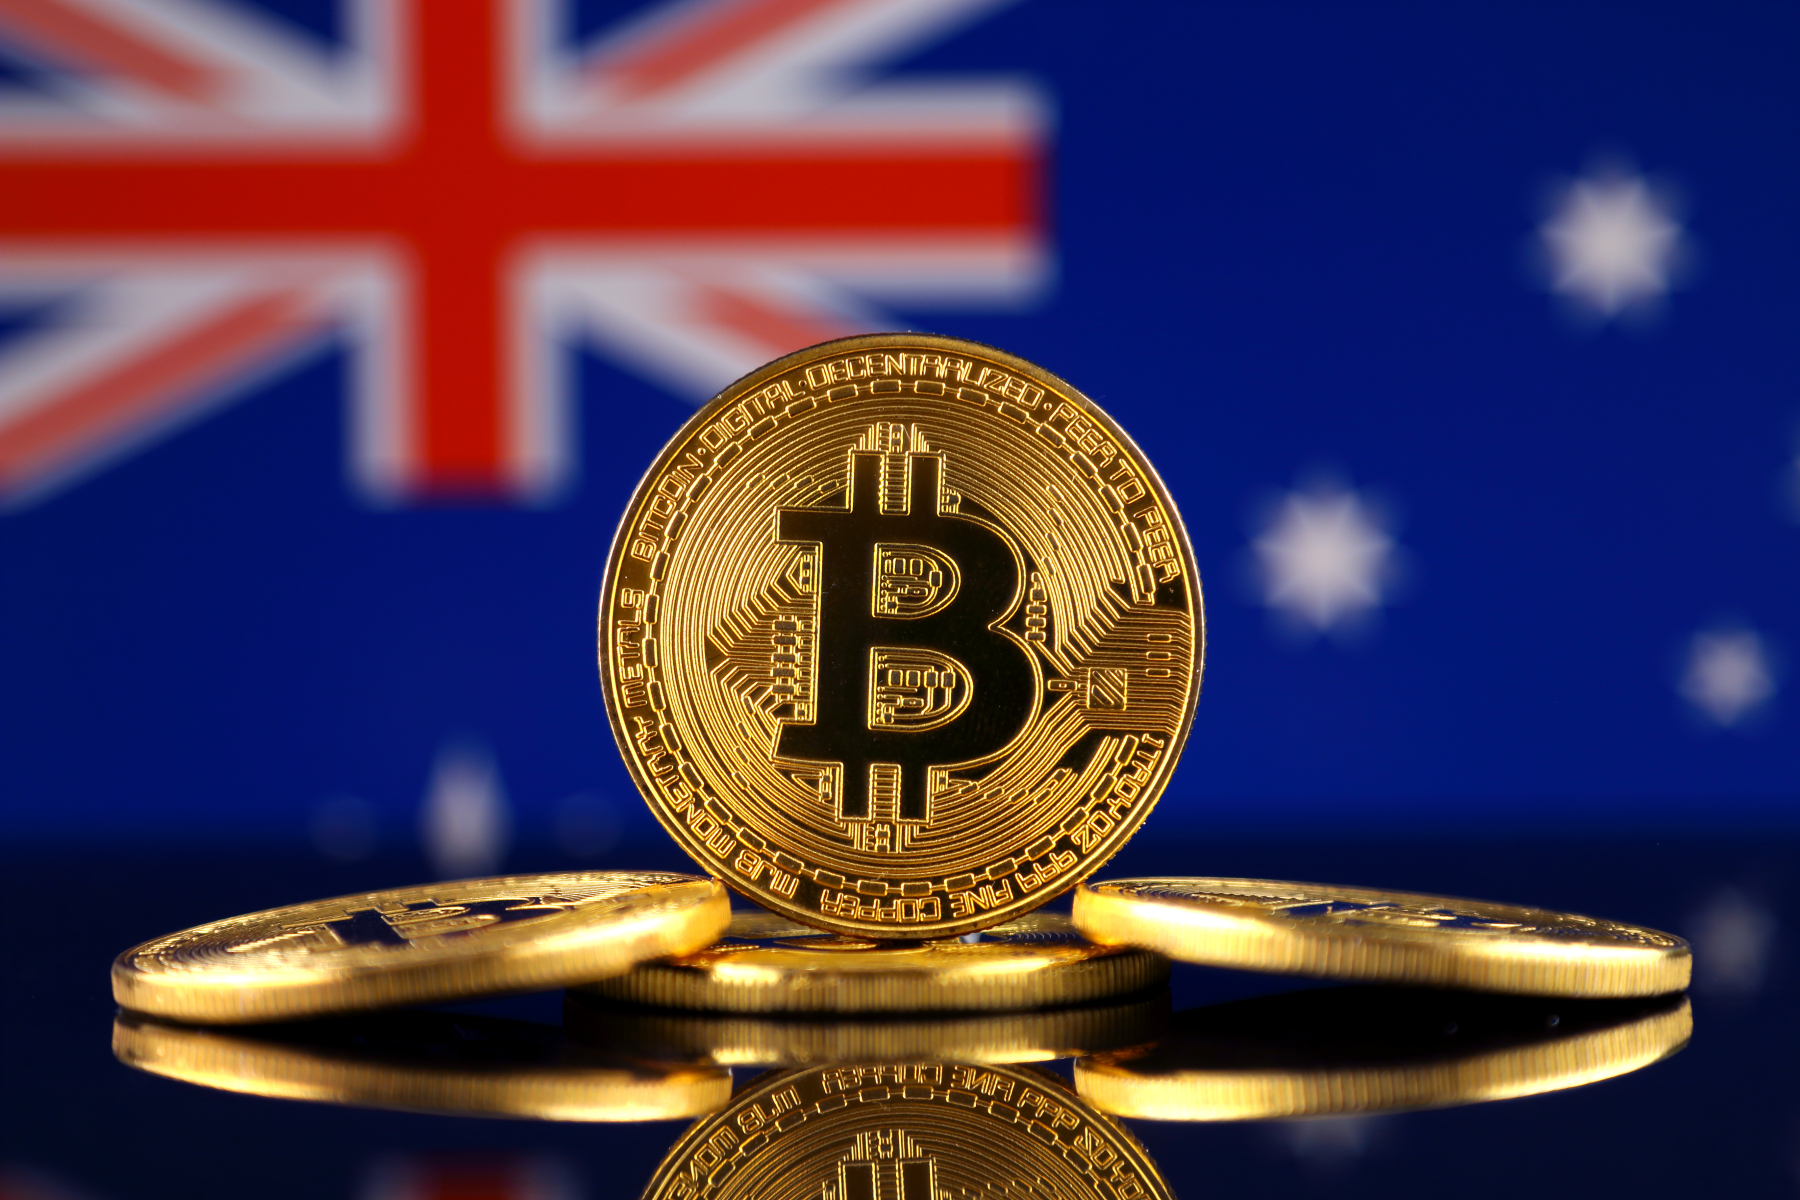 Australia wants to regulate crypto service providers by early 2023
